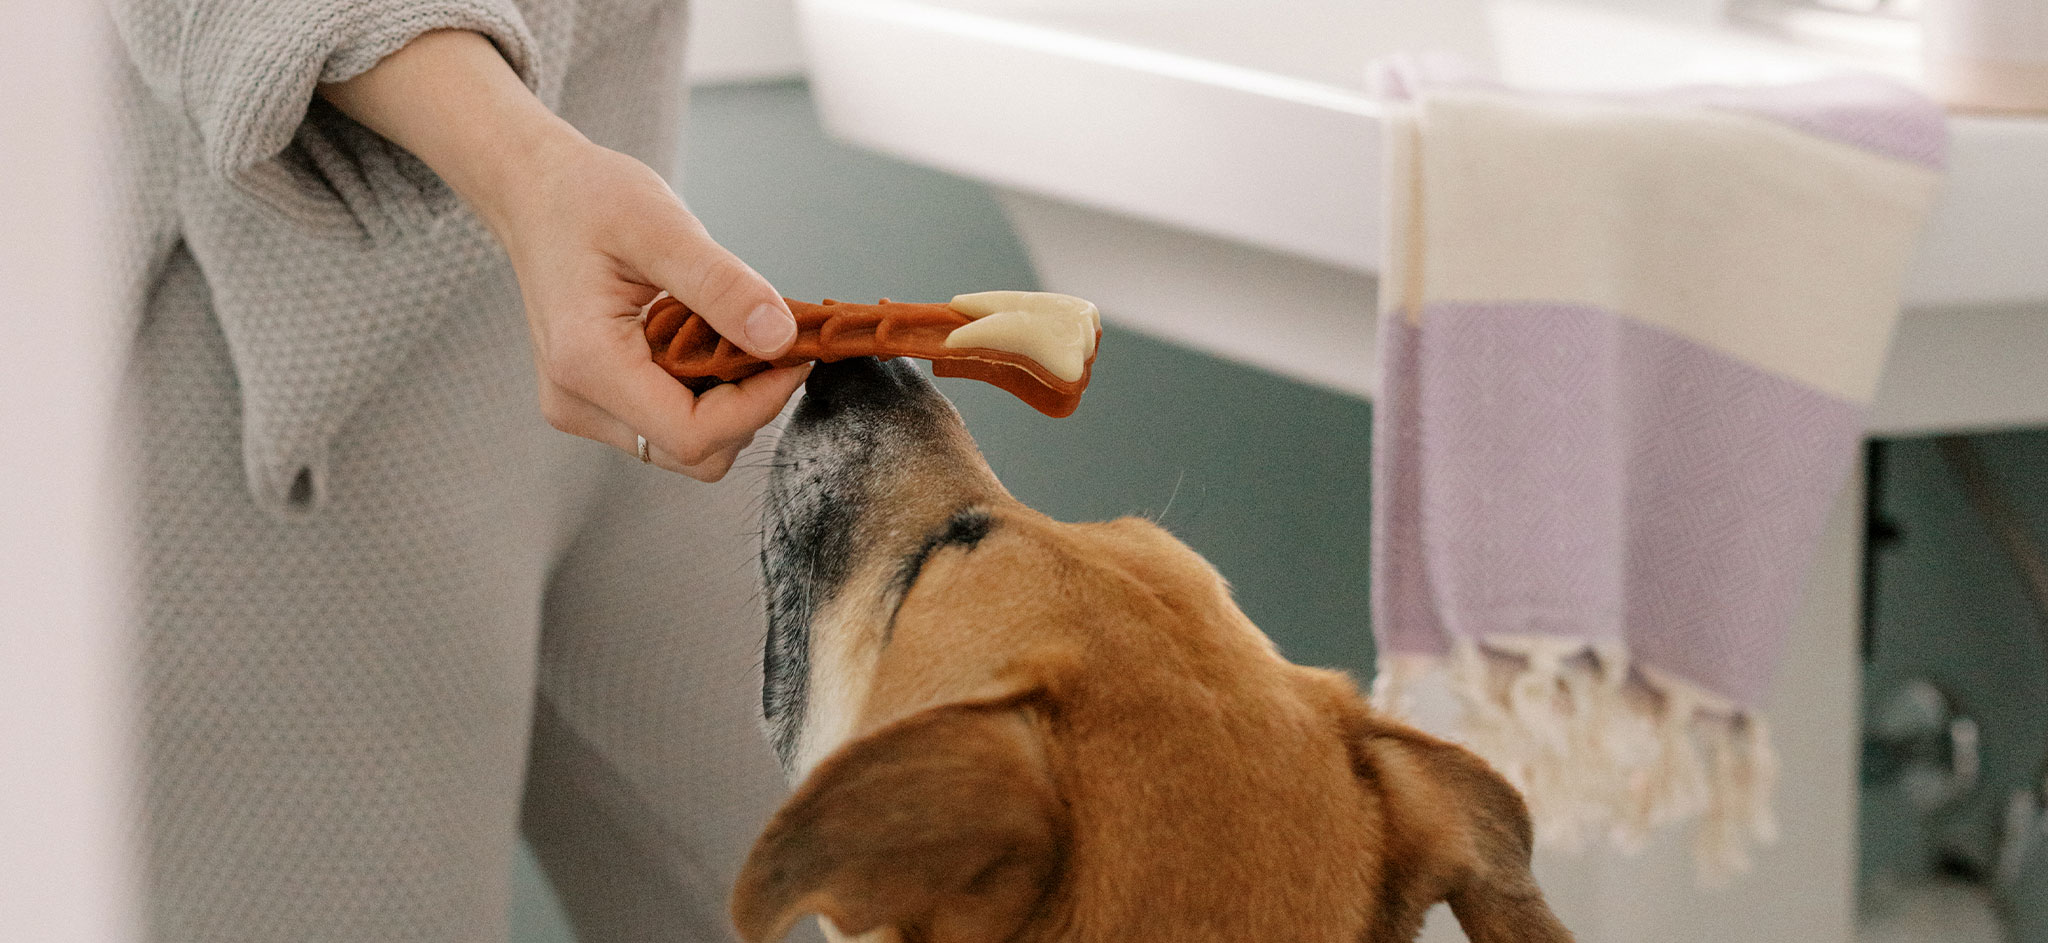 Give your dog one WHIMZEES dog dental treat per day and you’re giving them a fun, all natural way to help clean teeth, freshen breath, and reduce plaque and tartar – all while they chew!